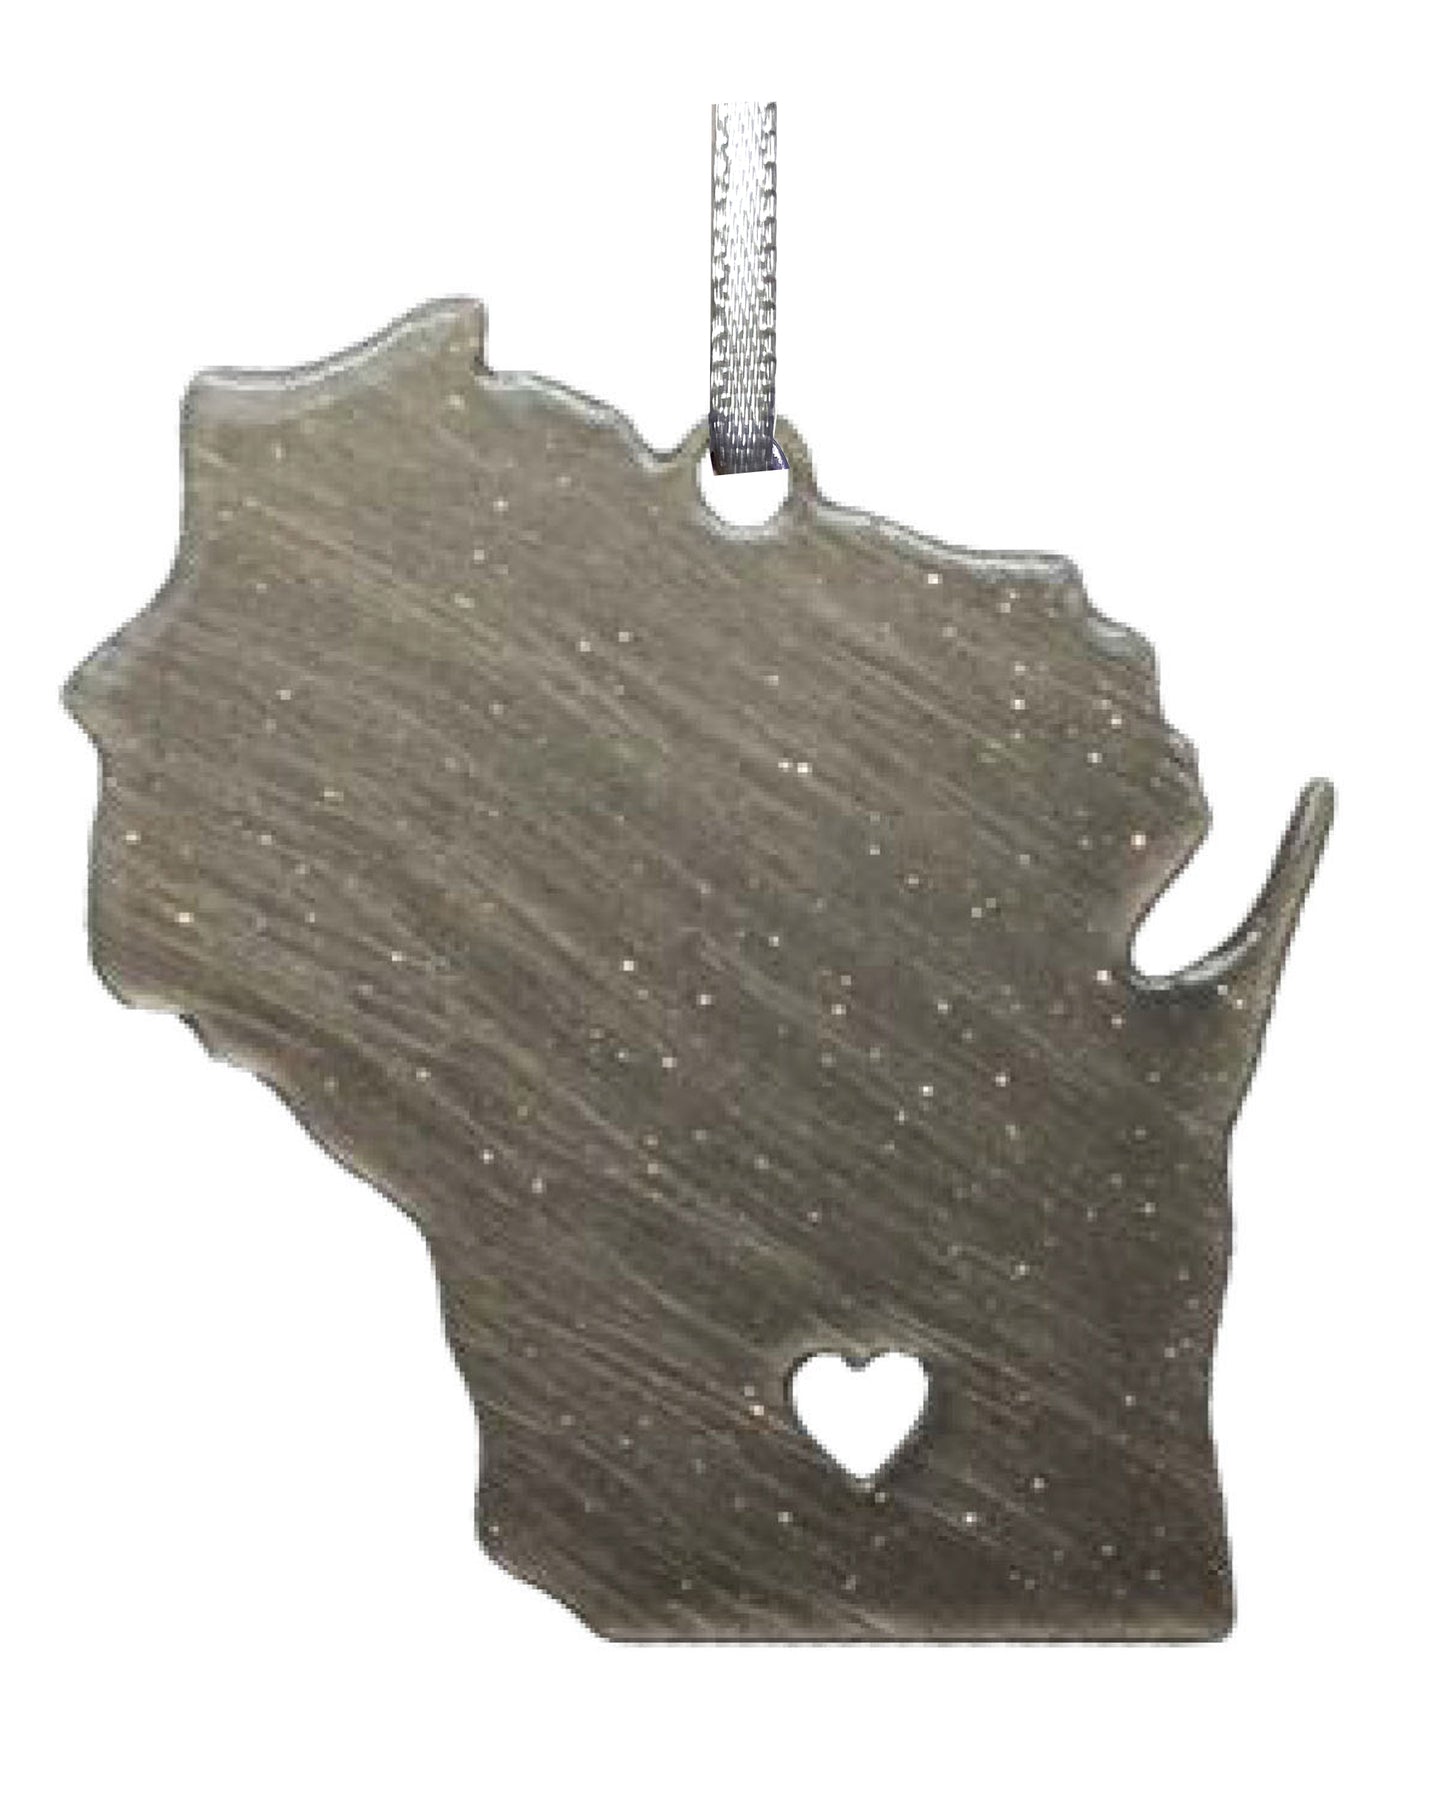 WI, I Heart Wisconsin, Stainless Steel Ornament 2.5 inch, #8187